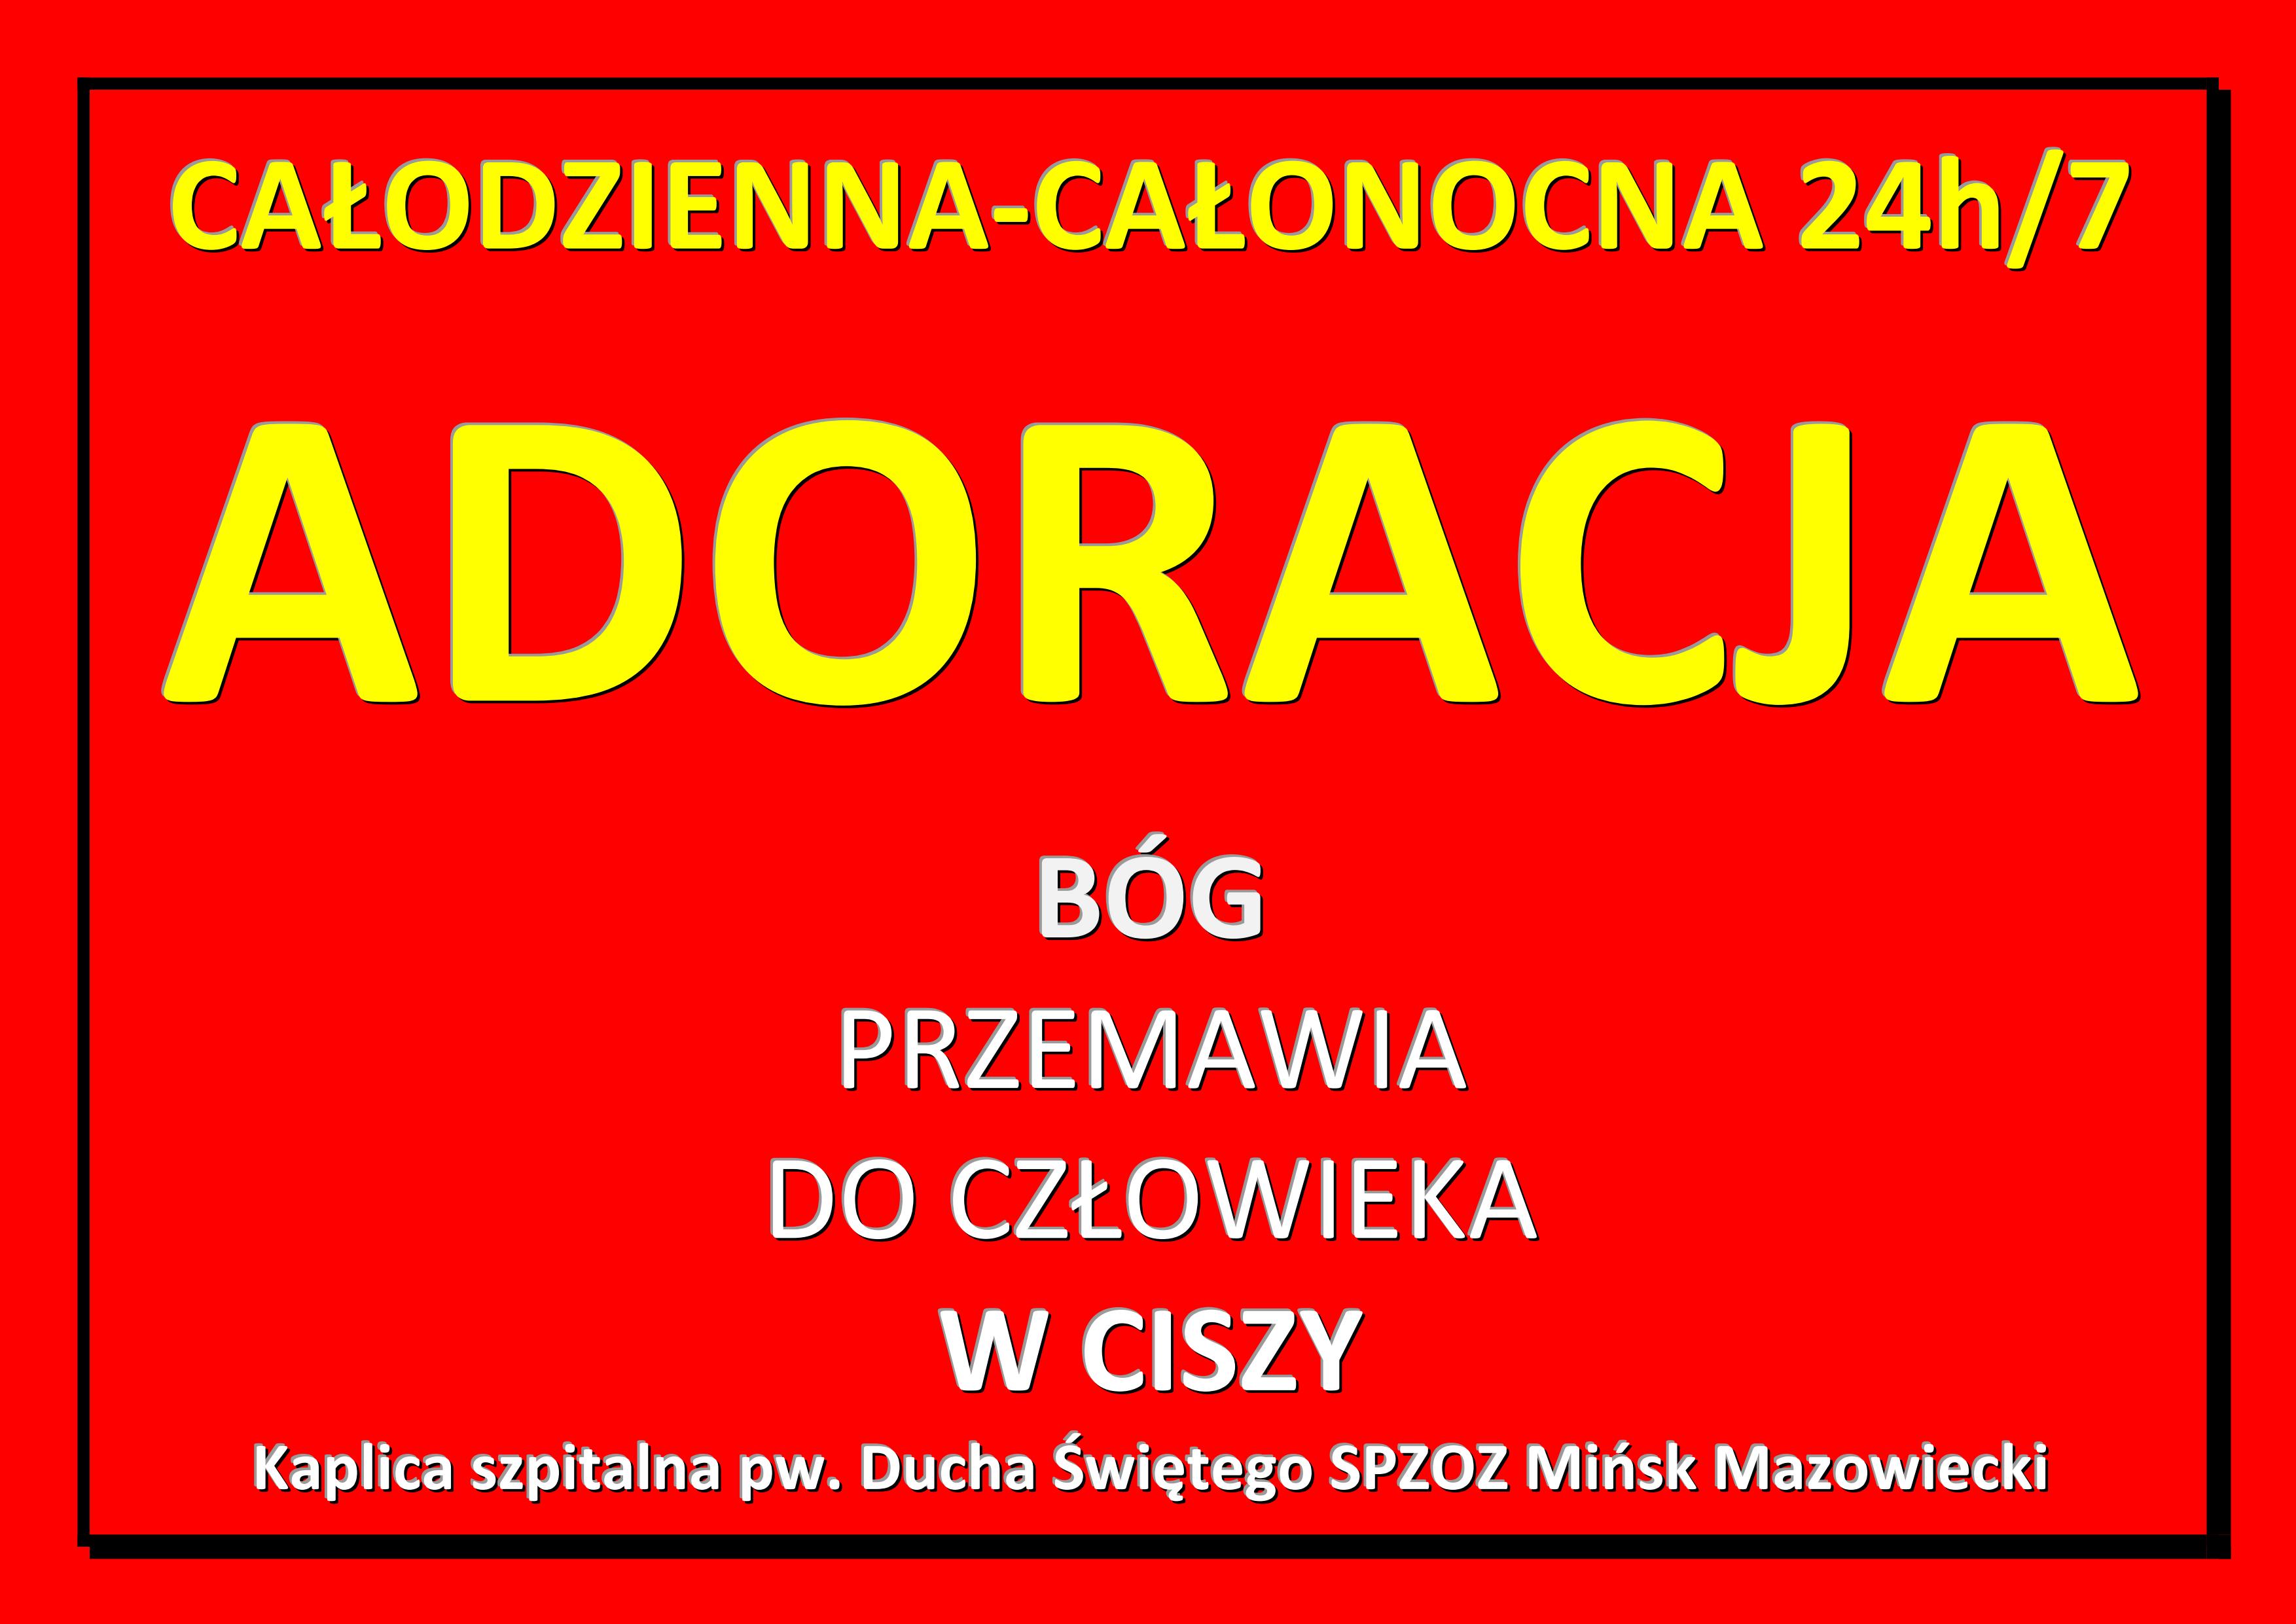 You are currently viewing ADORACJA 24h